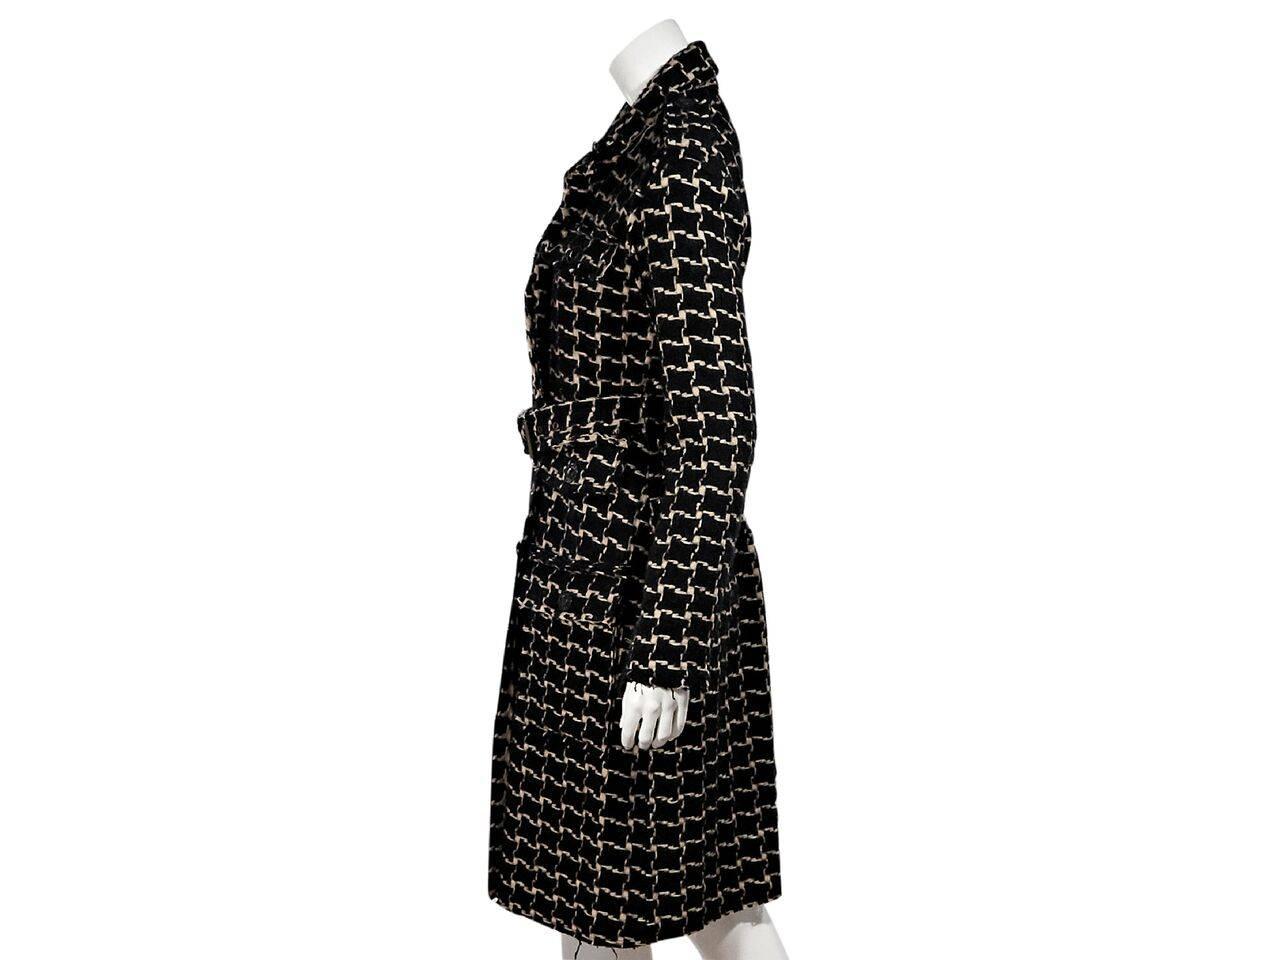 Product details:  Black and tan wool oversized houndstooth coat by Lanvin.  Raw edge trimming.  Notched lapel.  Long sleeves.  Shoulder epaulettes.  Adjustable belted waist.  Button-front closure.  Button flap chest and waist pockets.  
Condition: